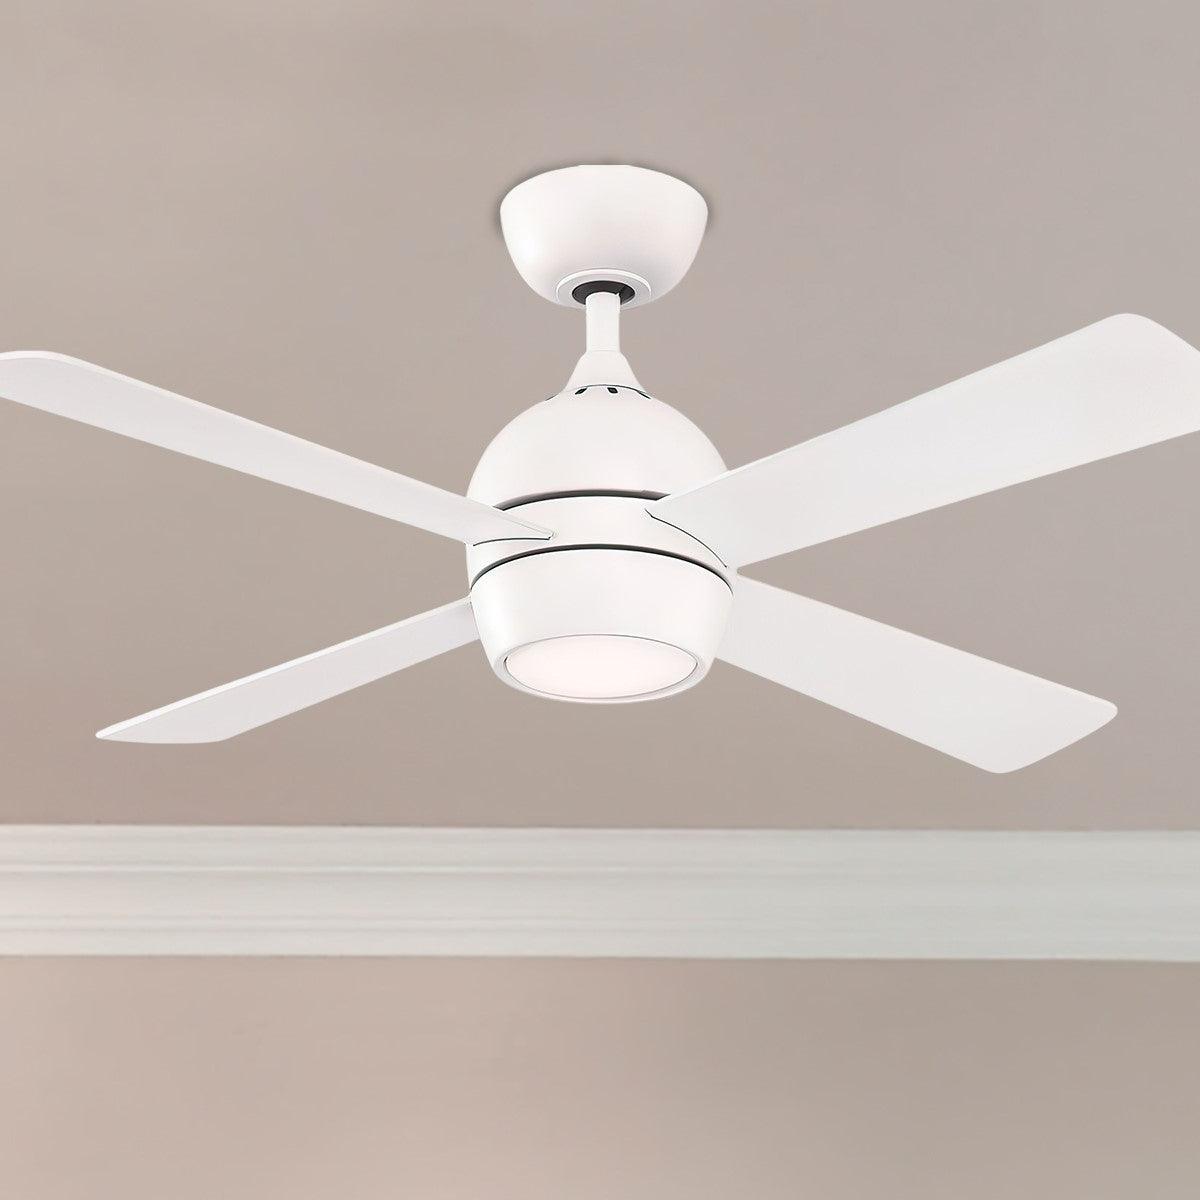 Kwad 44 Inch Modern Ceiling Fan With Light And Remote, Opal Frosted Glass